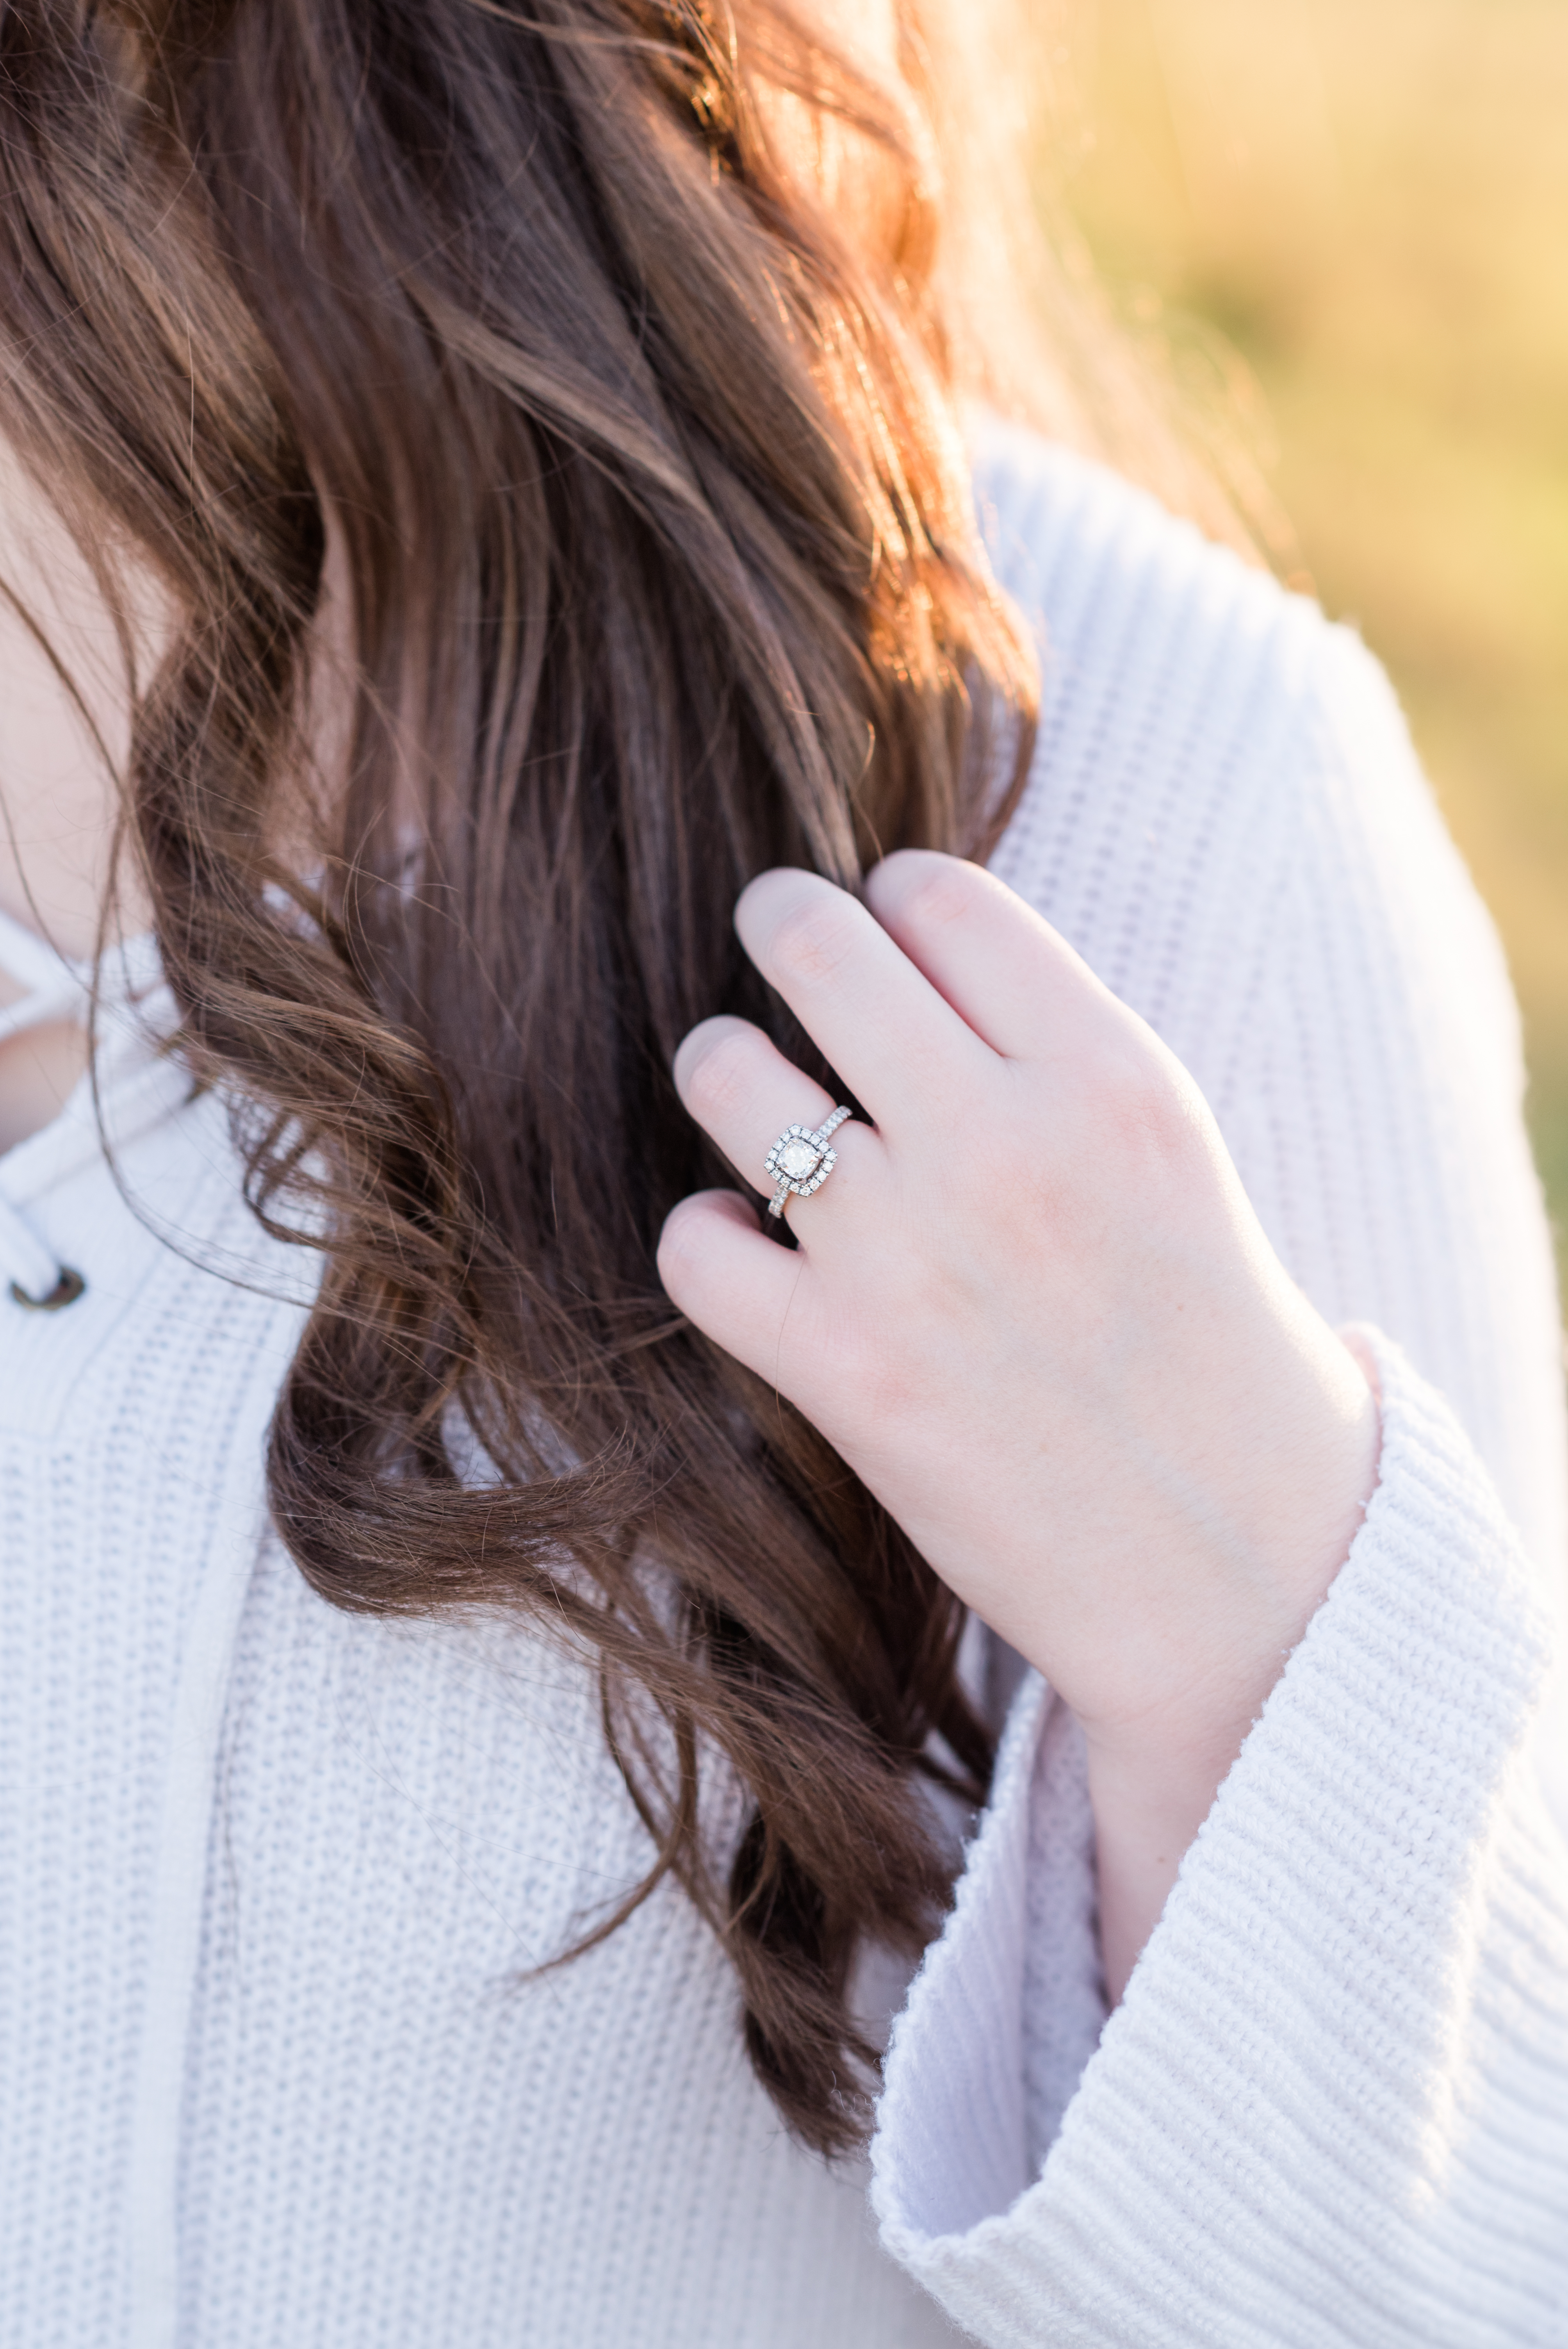 Fall Engagement at The Park at Harlinsdale Farm Franklin, Tennessee